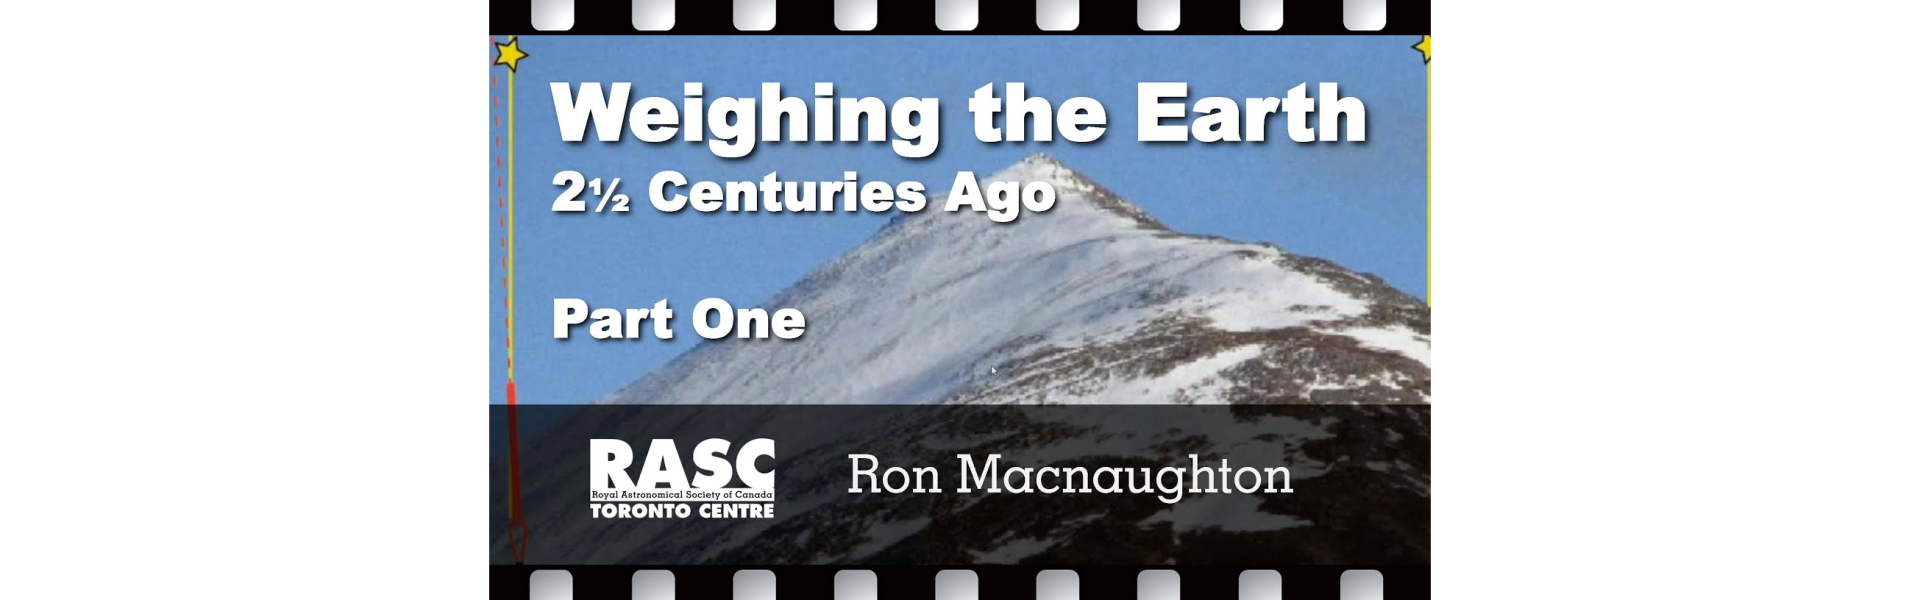 Weighing the Earth 2½ Centuries Ago - Part One